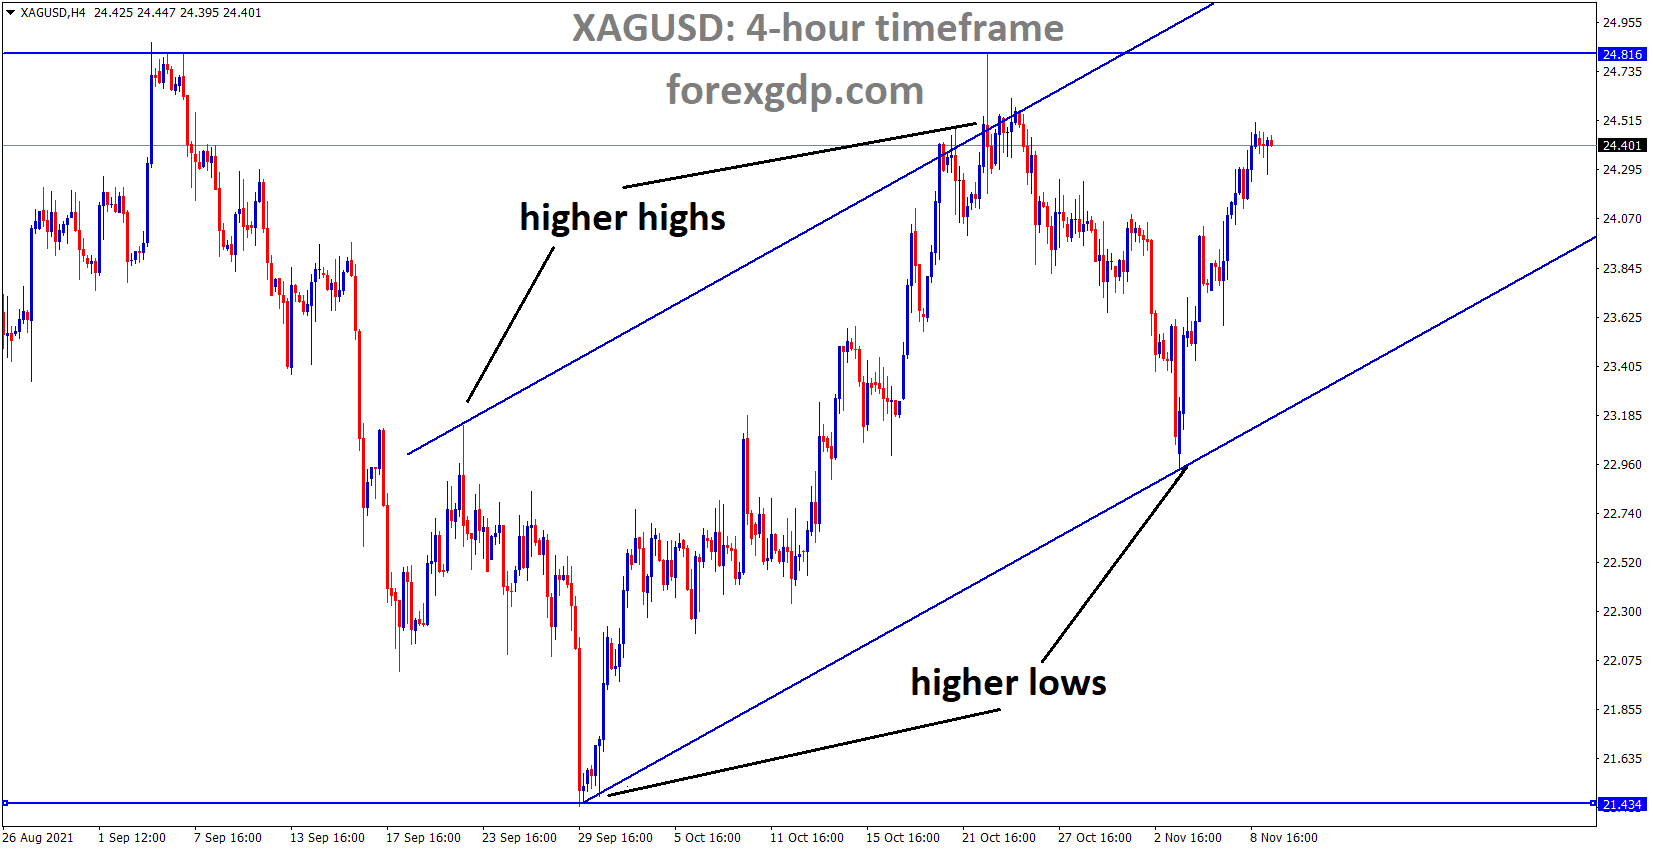 XAGUSD Silver price is moving in an ascending channel and the market rebounded from the higher low area